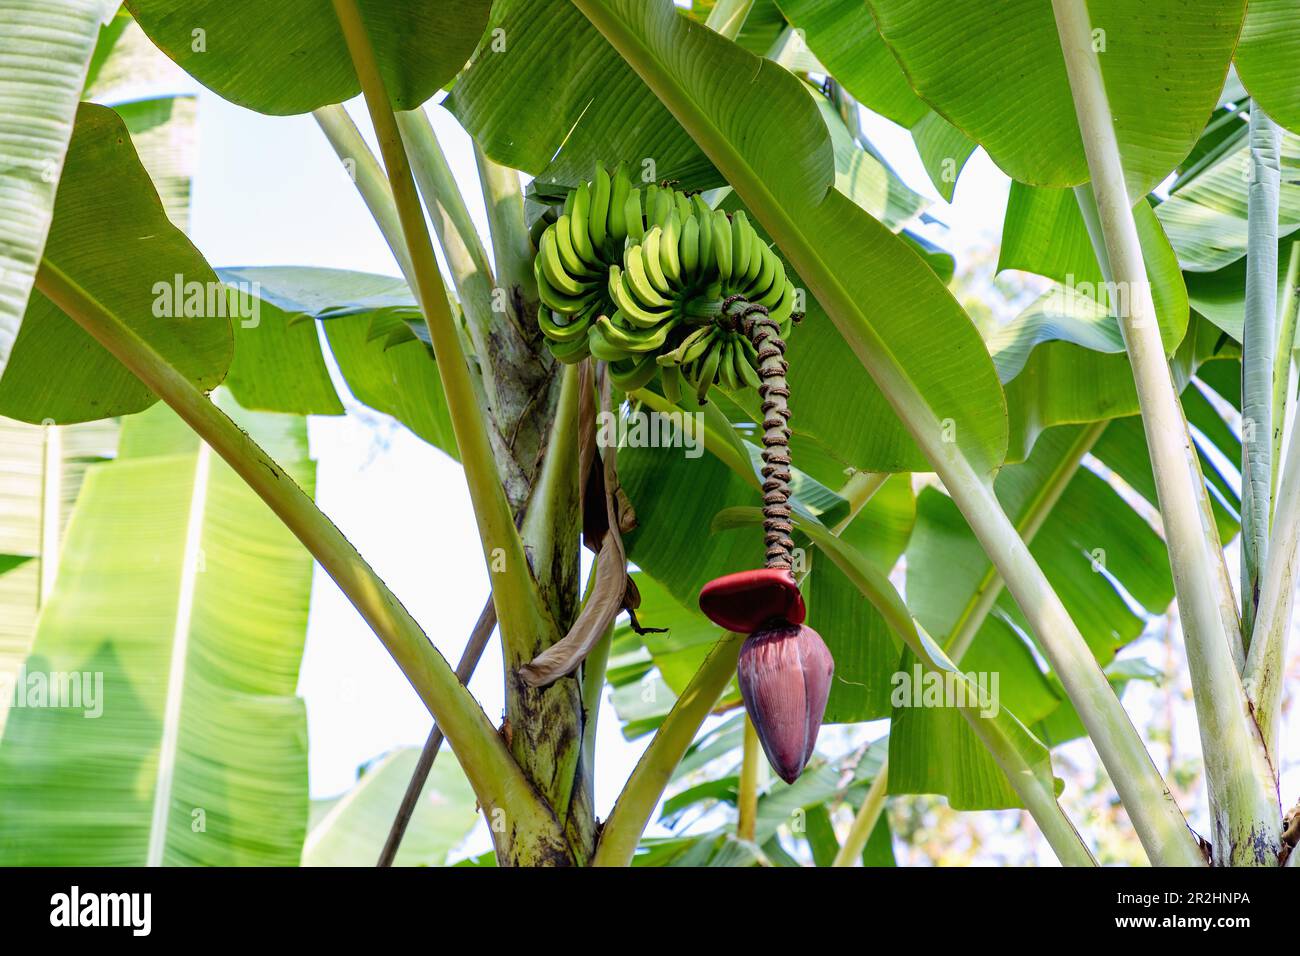 Inflorescence and infructescence of the plantain on the island of São Tomé in West Africa Stock Photo